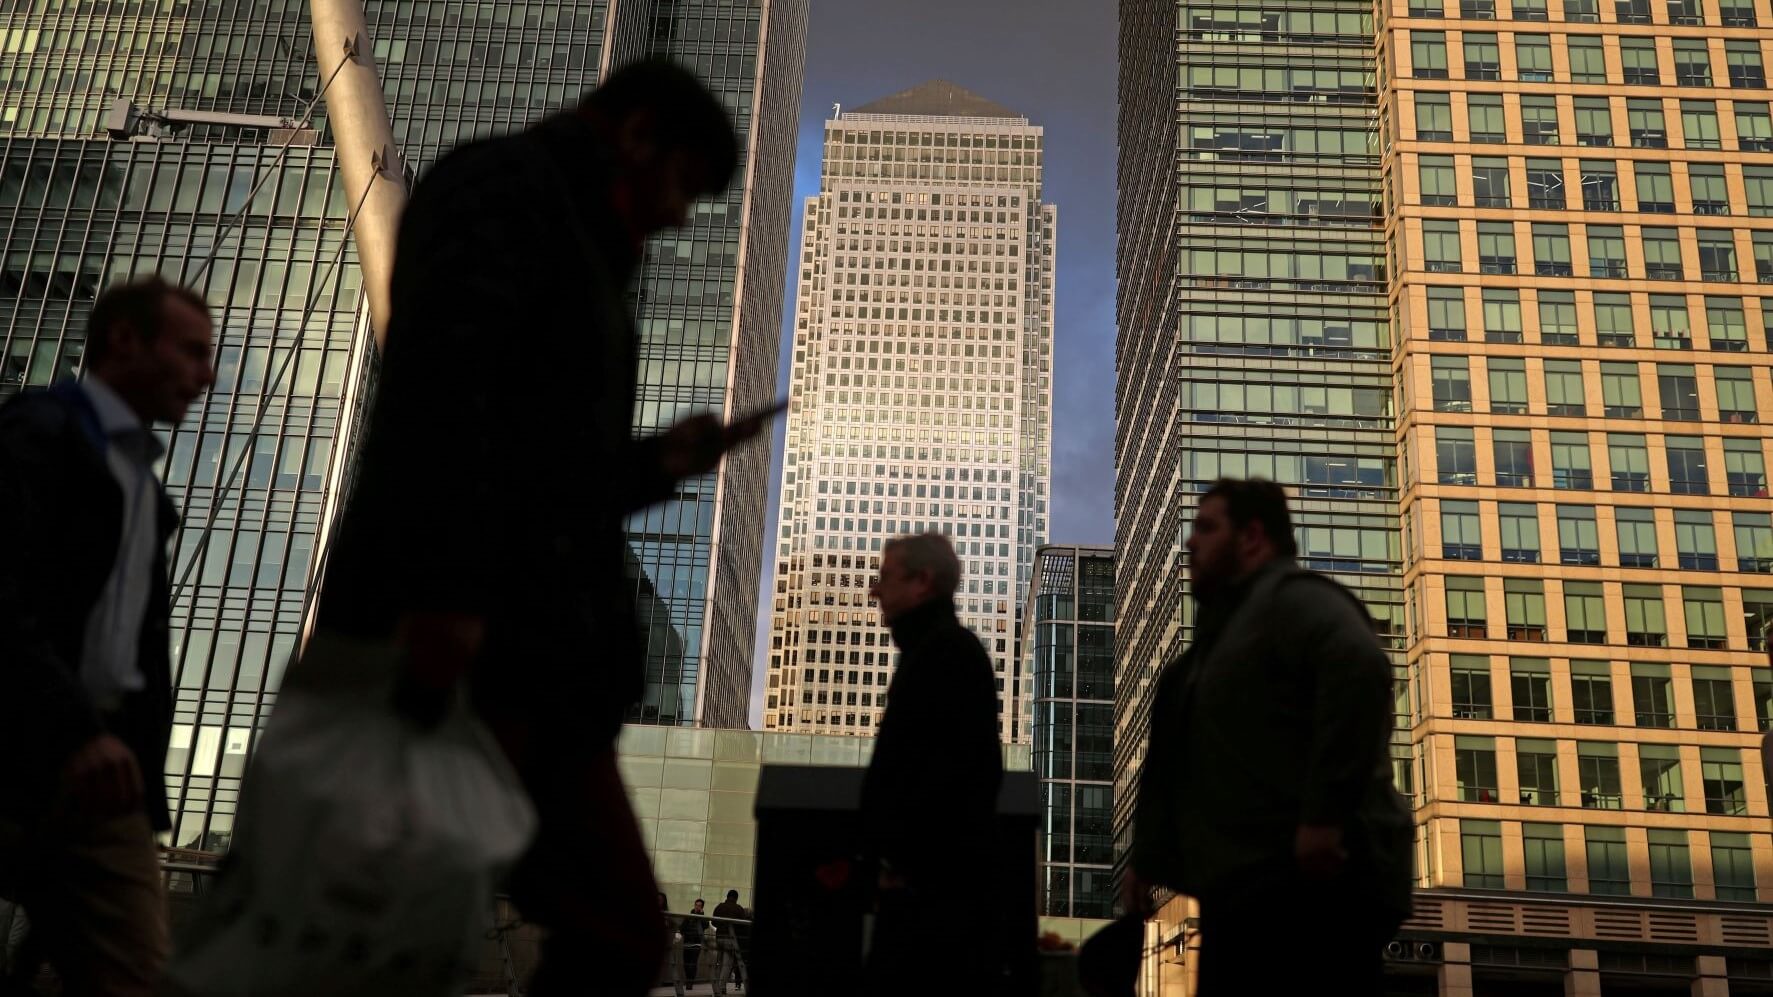 UK Firms Report Growth At 17-Month Low, Inflation Pressures Ease - PMI